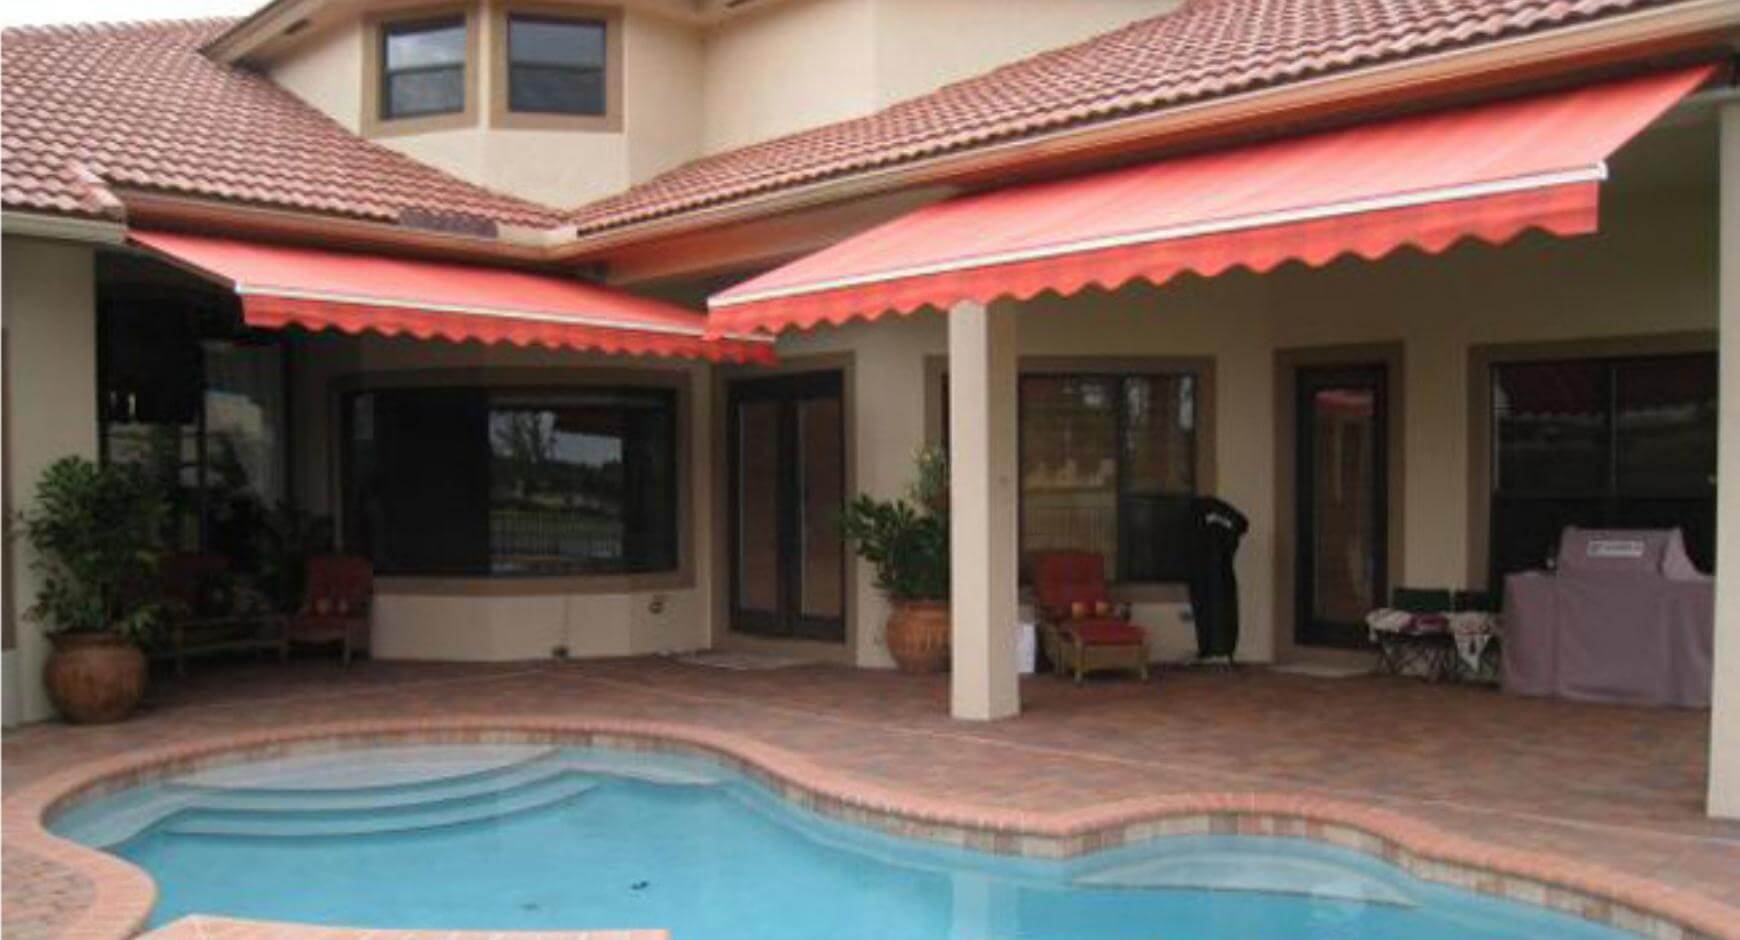 awnings cover patio with pool